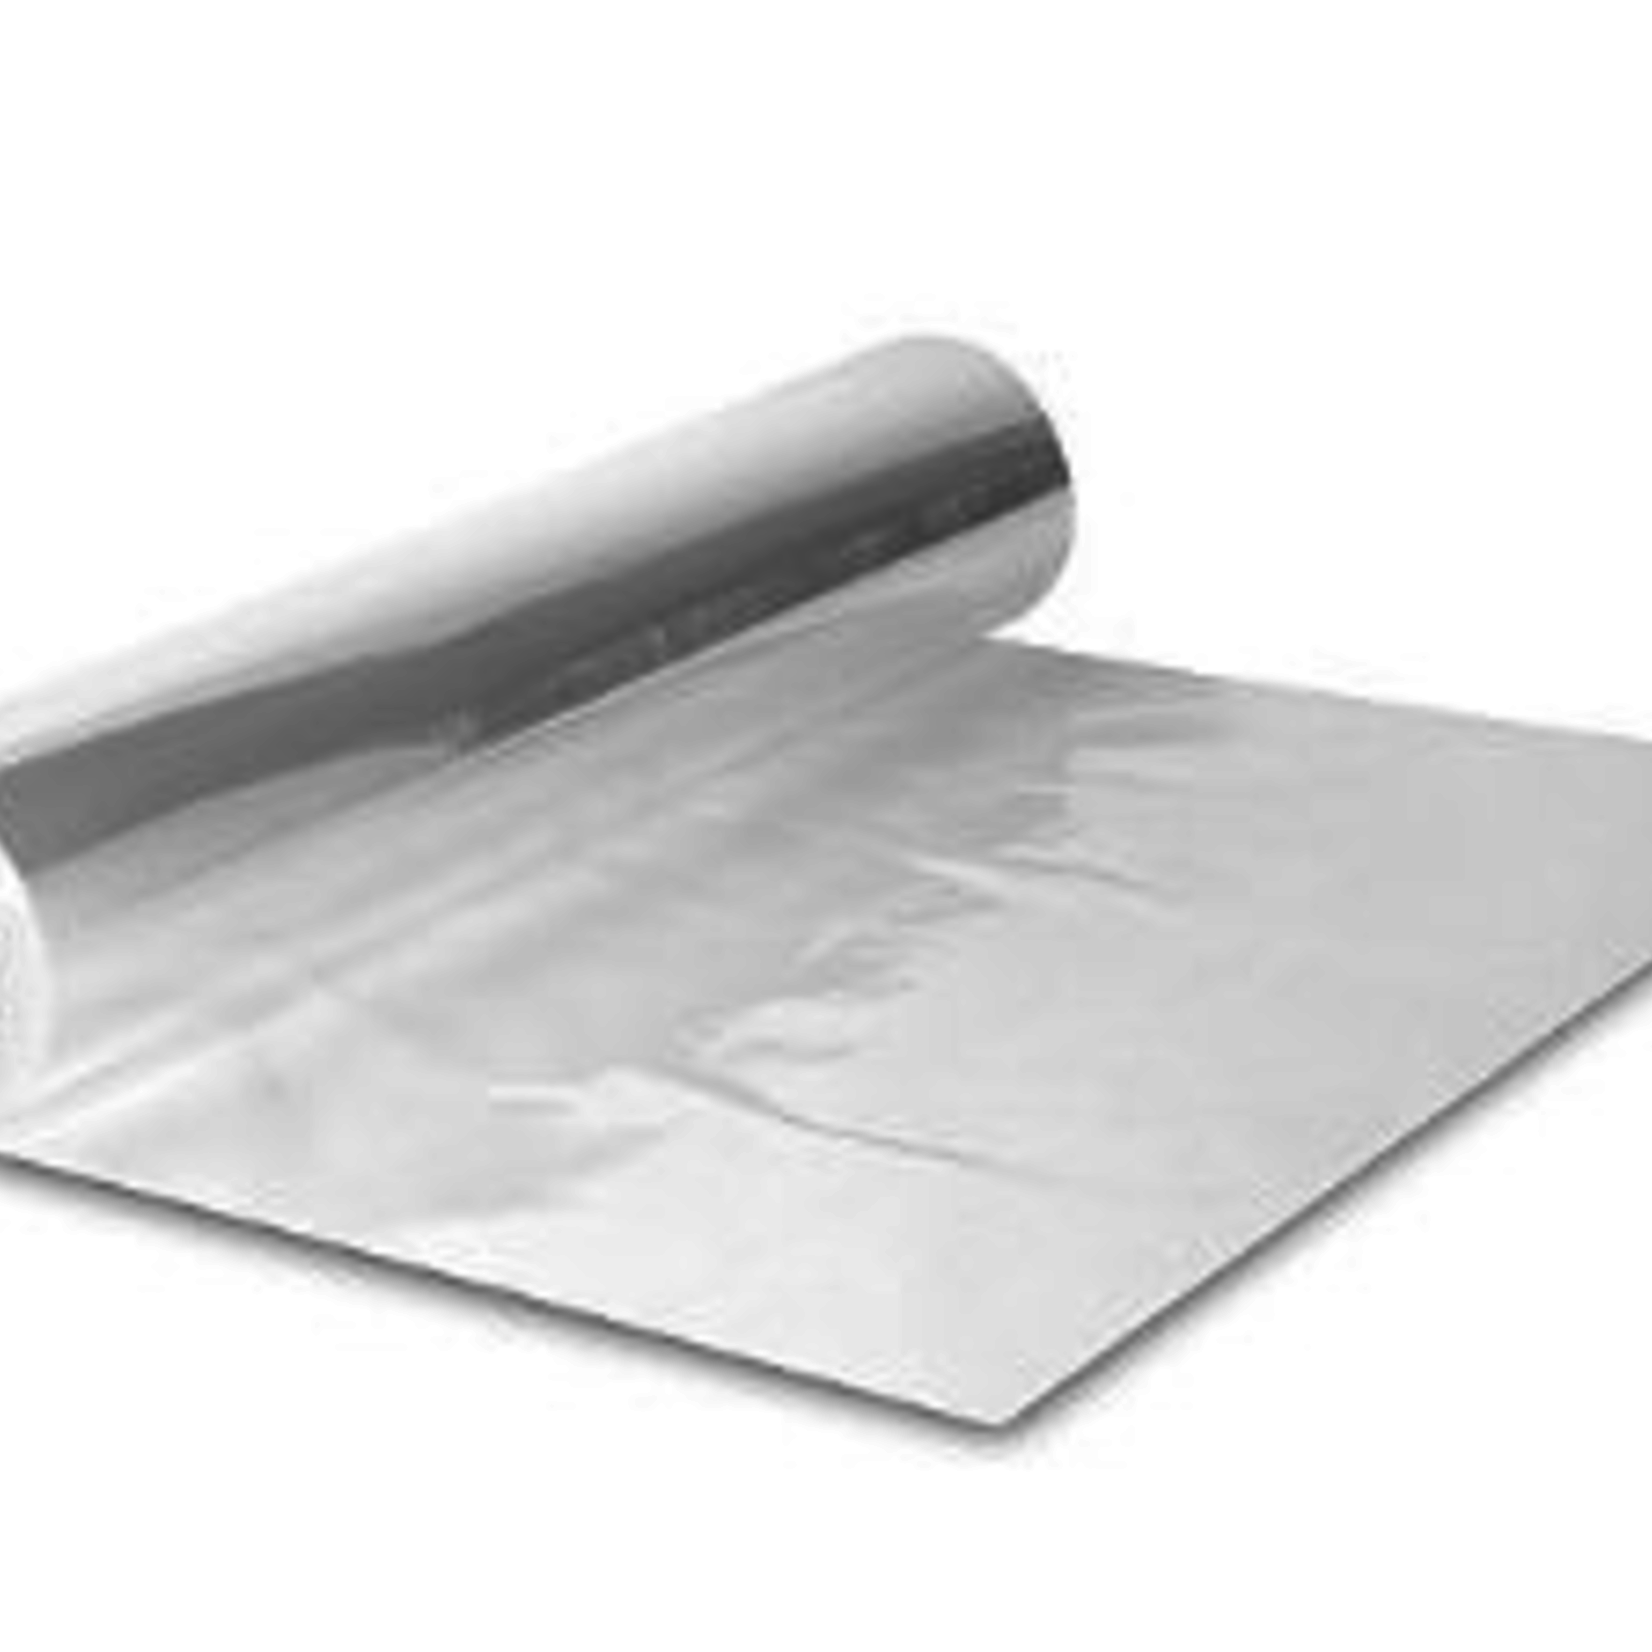 Cellophane Rolls 40"" x1500' clear